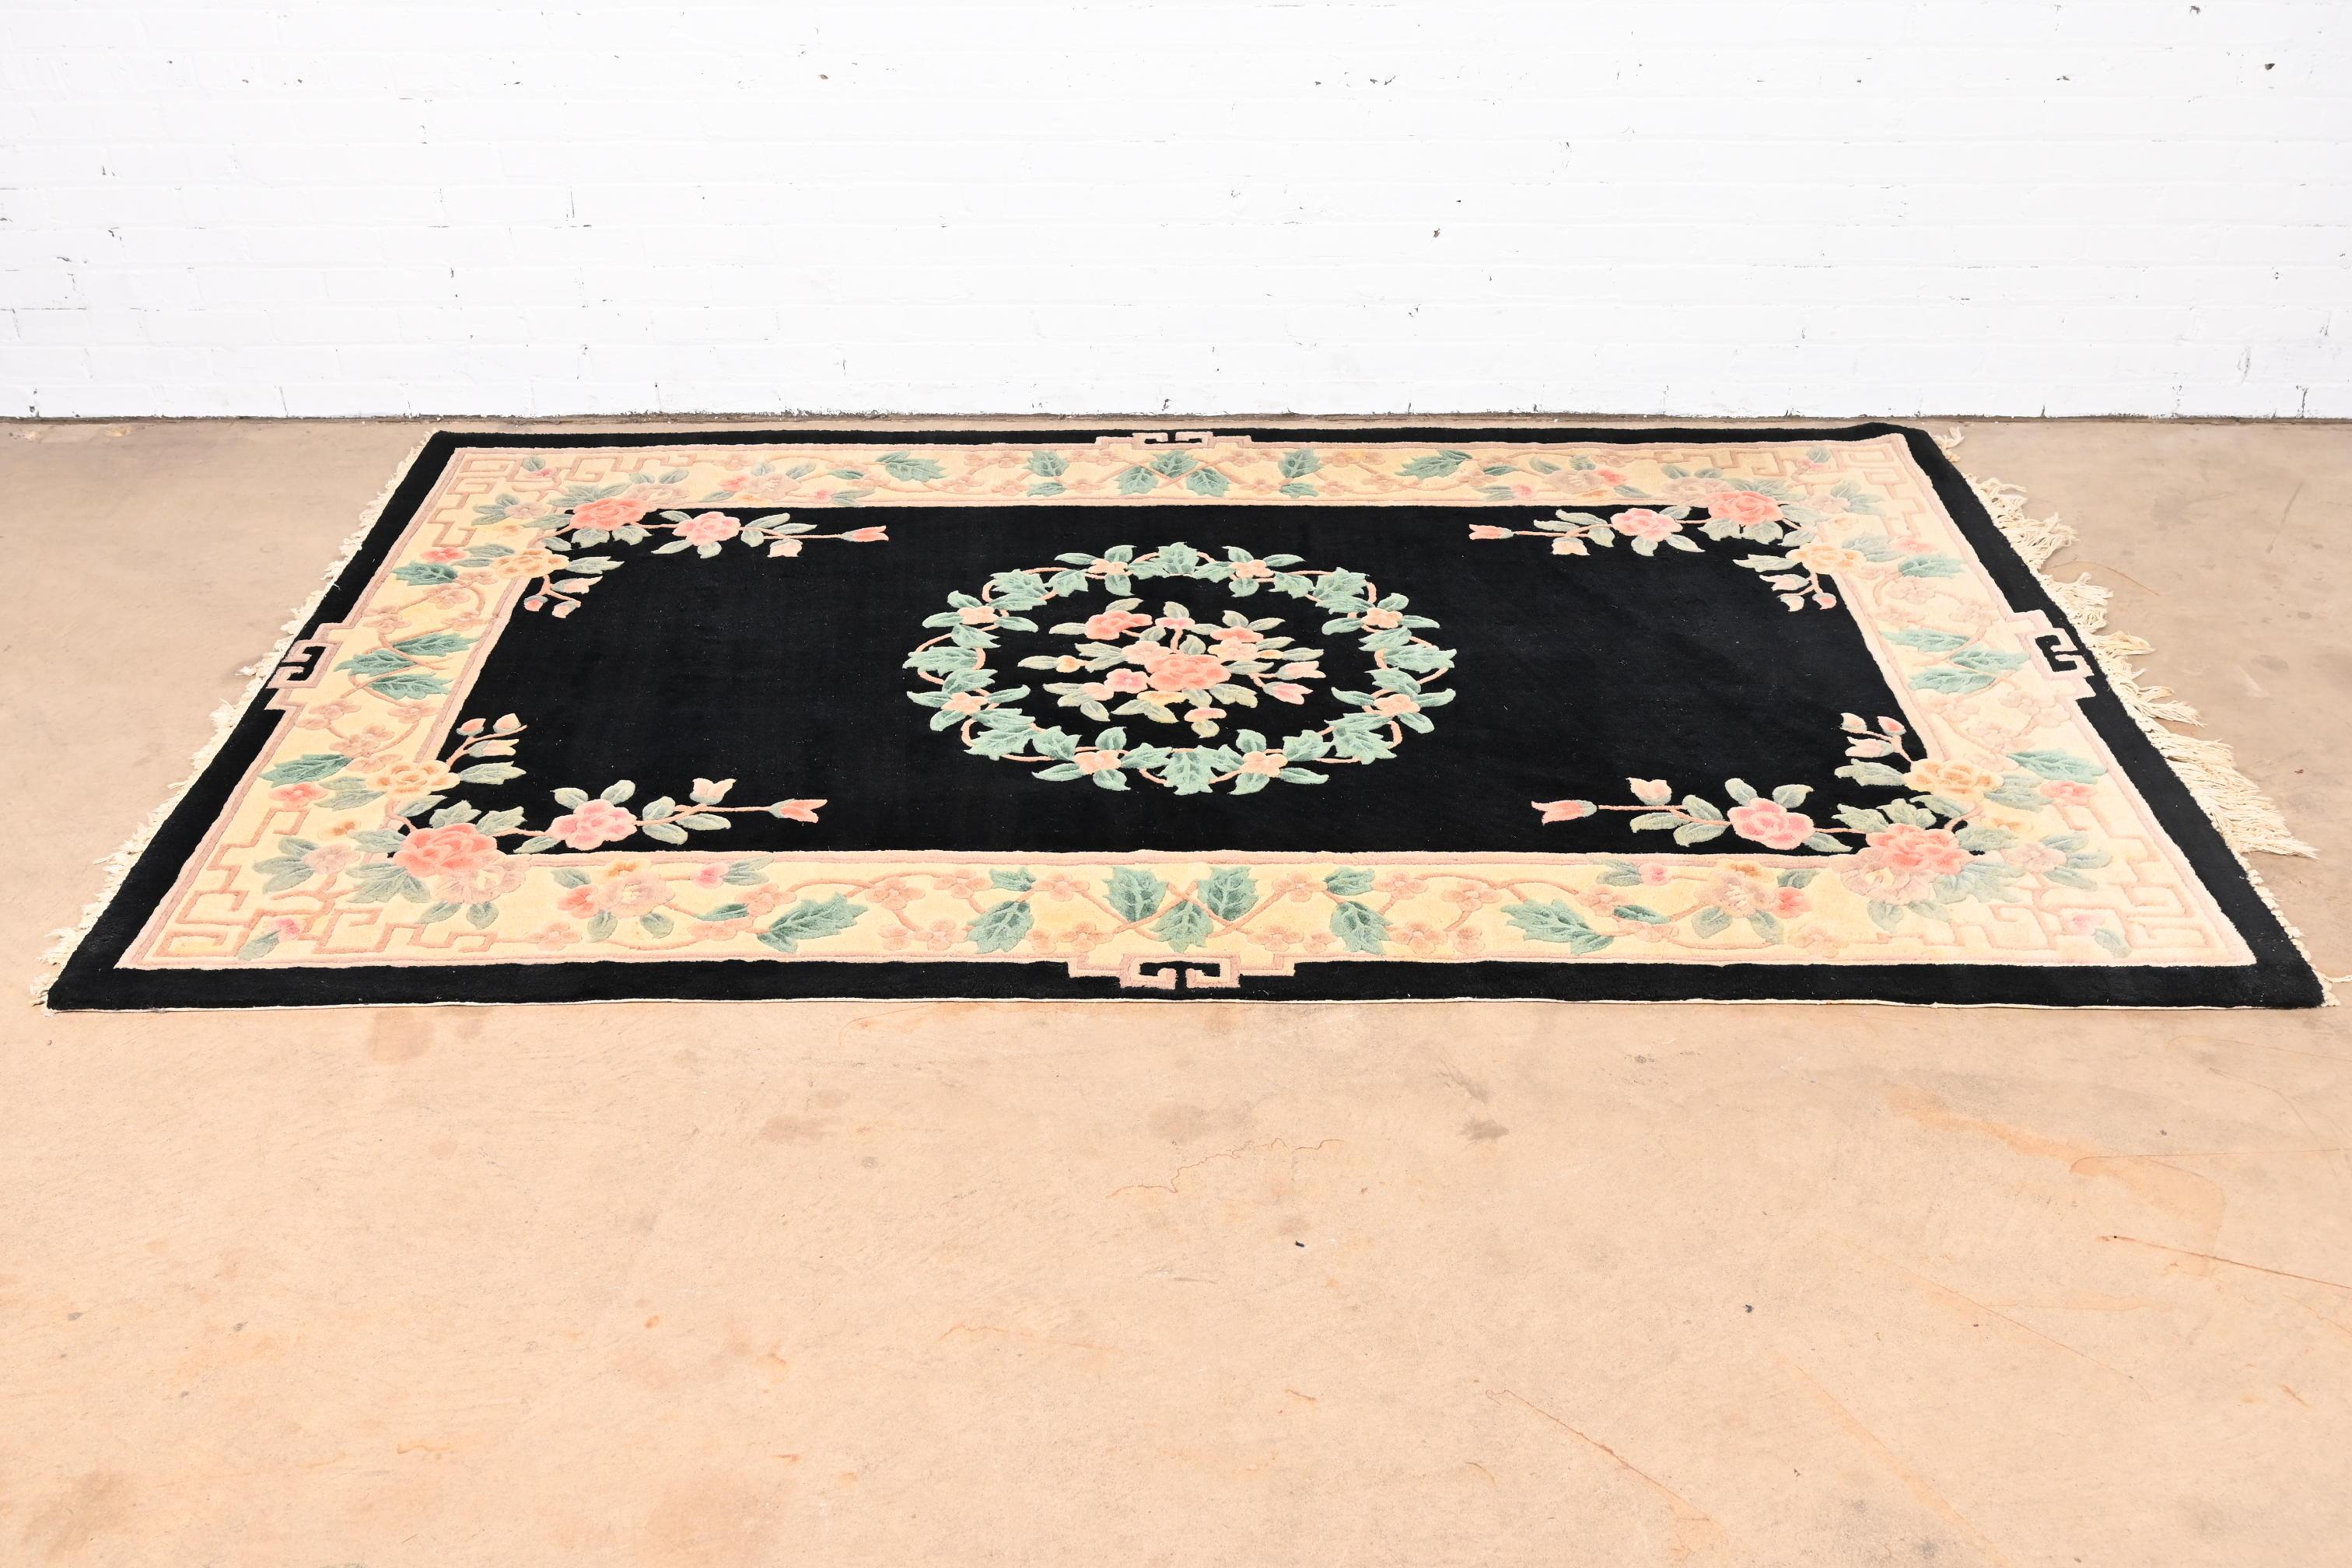 A beautiful hand made vintage Chinese sculpted wool area rug

China, Mid-20th Century

Nice floral design, with predominant colors in light green, peach, and black.

Measures: 63